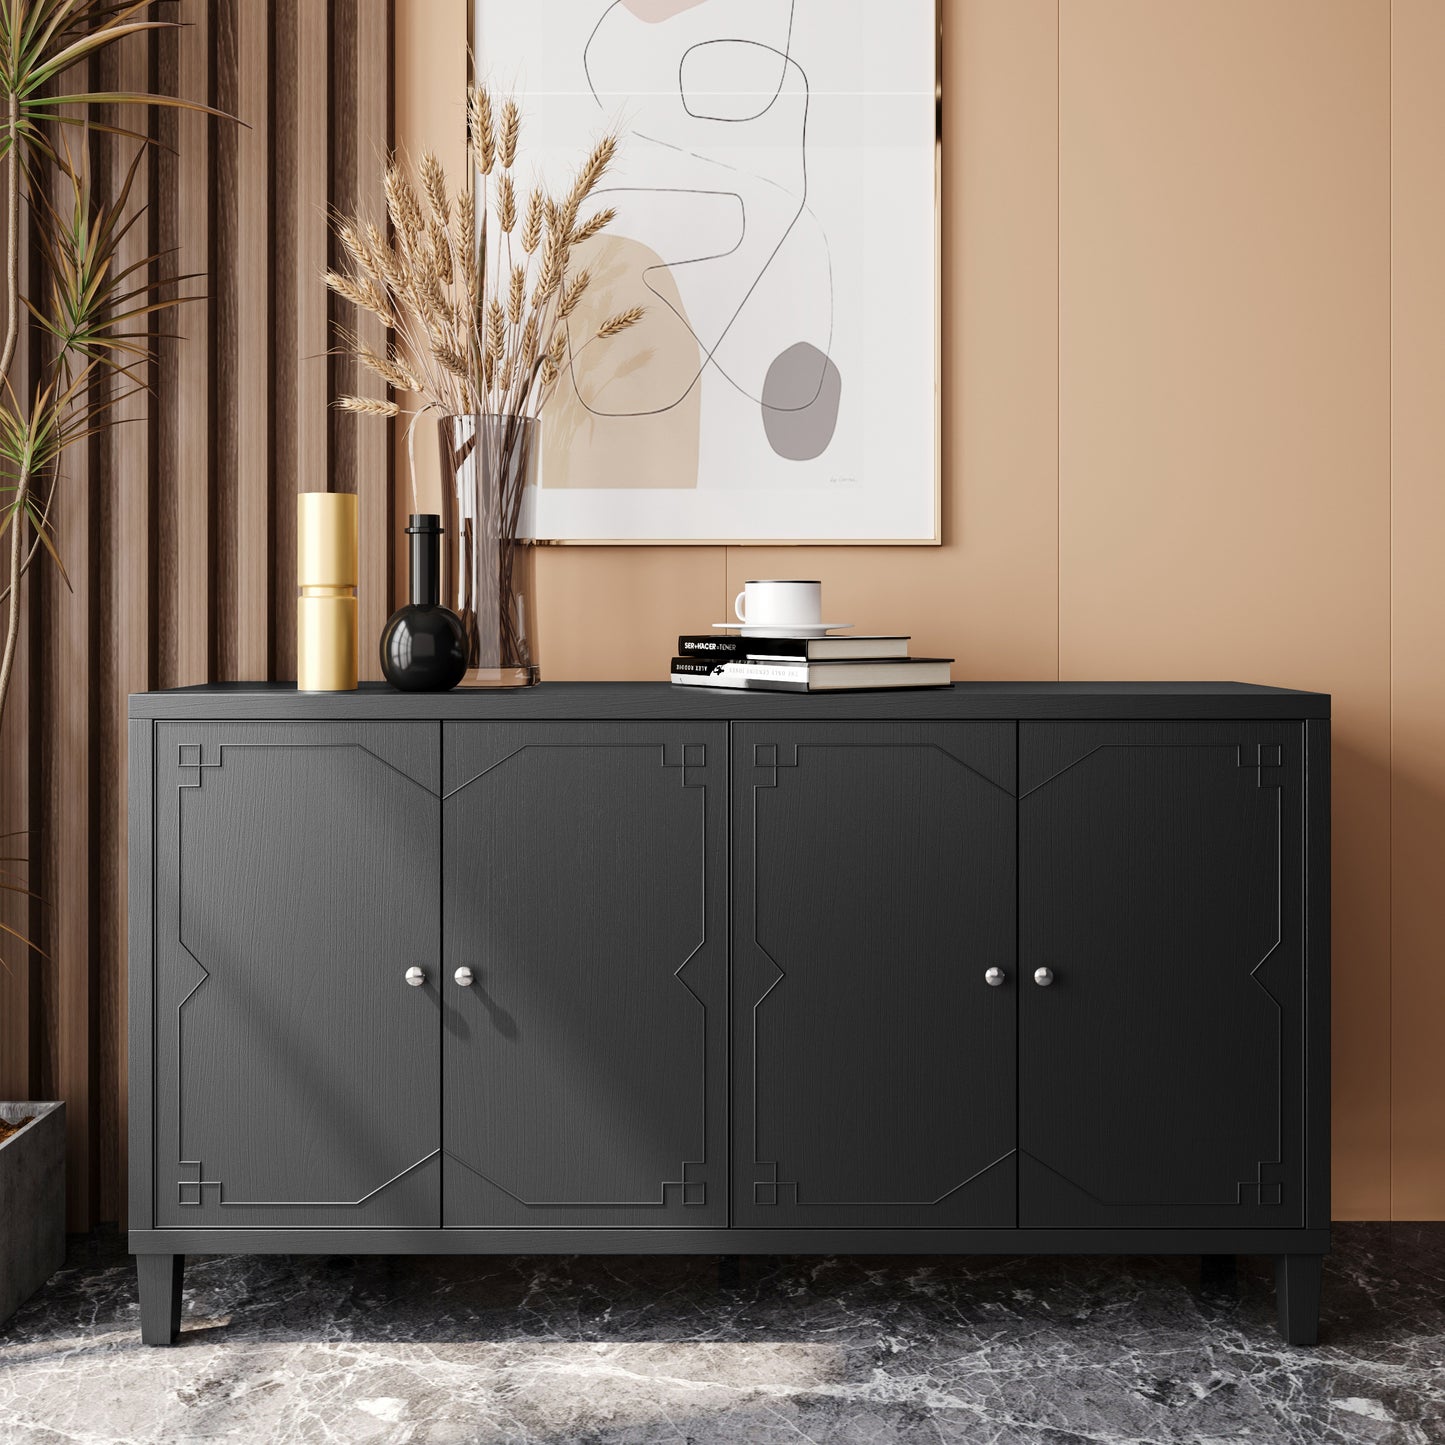 Refined Countryside Charm: The Signature 4-Door Accent Wooden Cabinet – Spacious and Stylish Storage Sideboard with Distressed Black Finish; Perfect for Any Room, From Living Space to Dining Area.